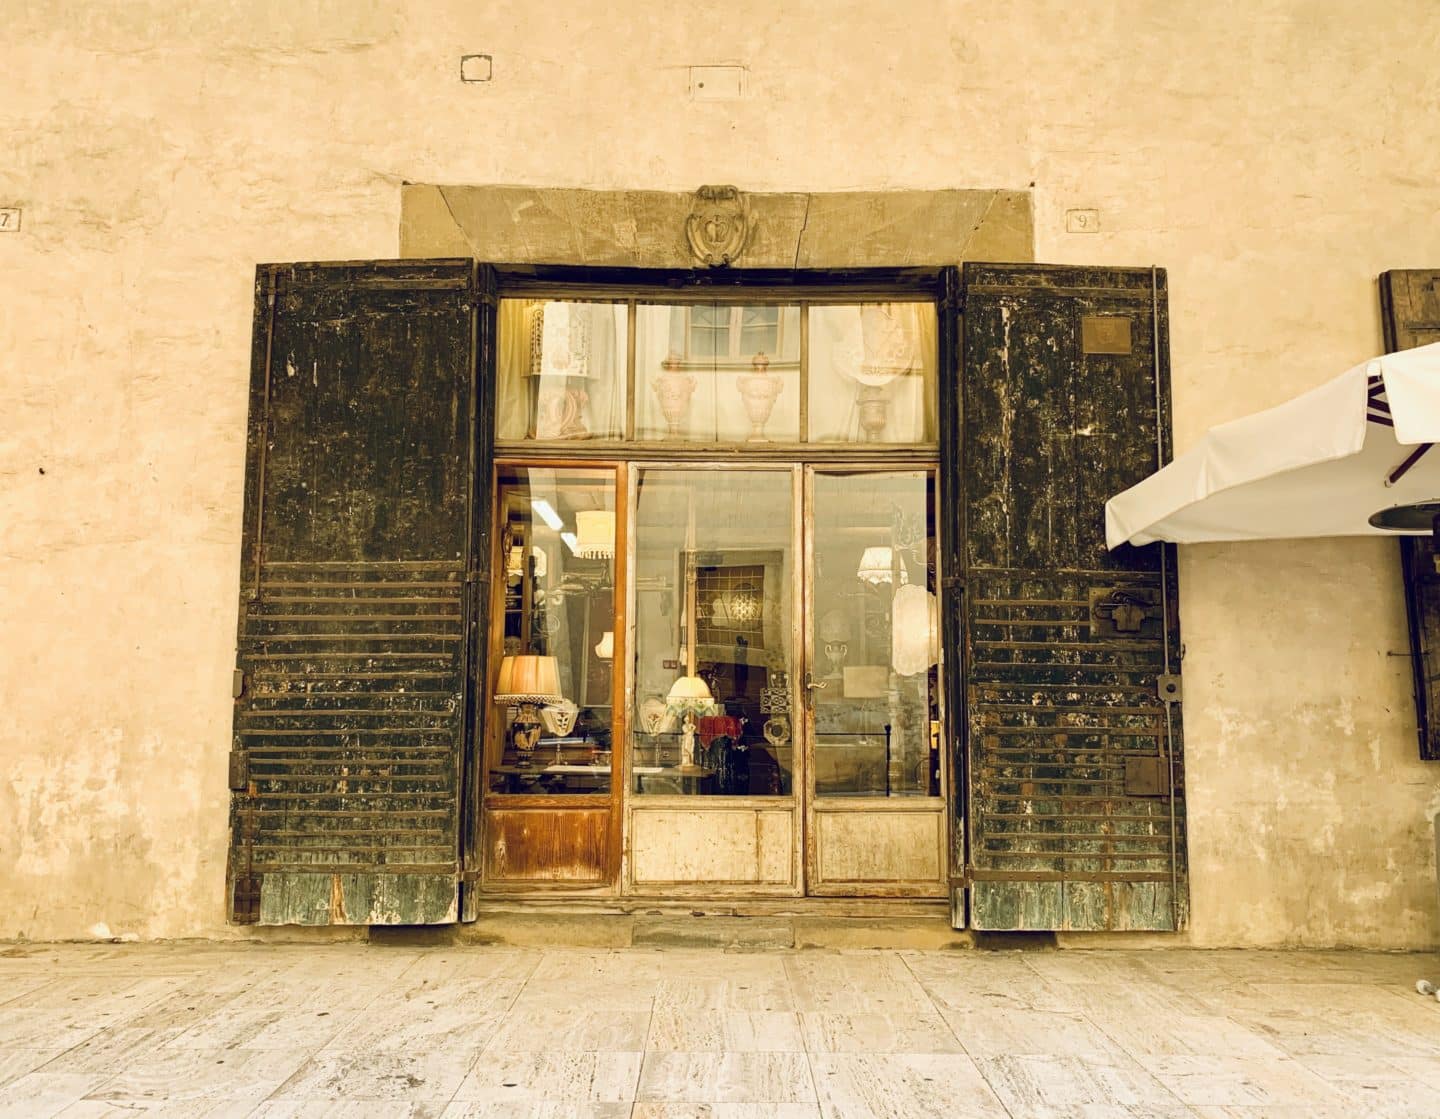 Antique Store shop front in Arezzo